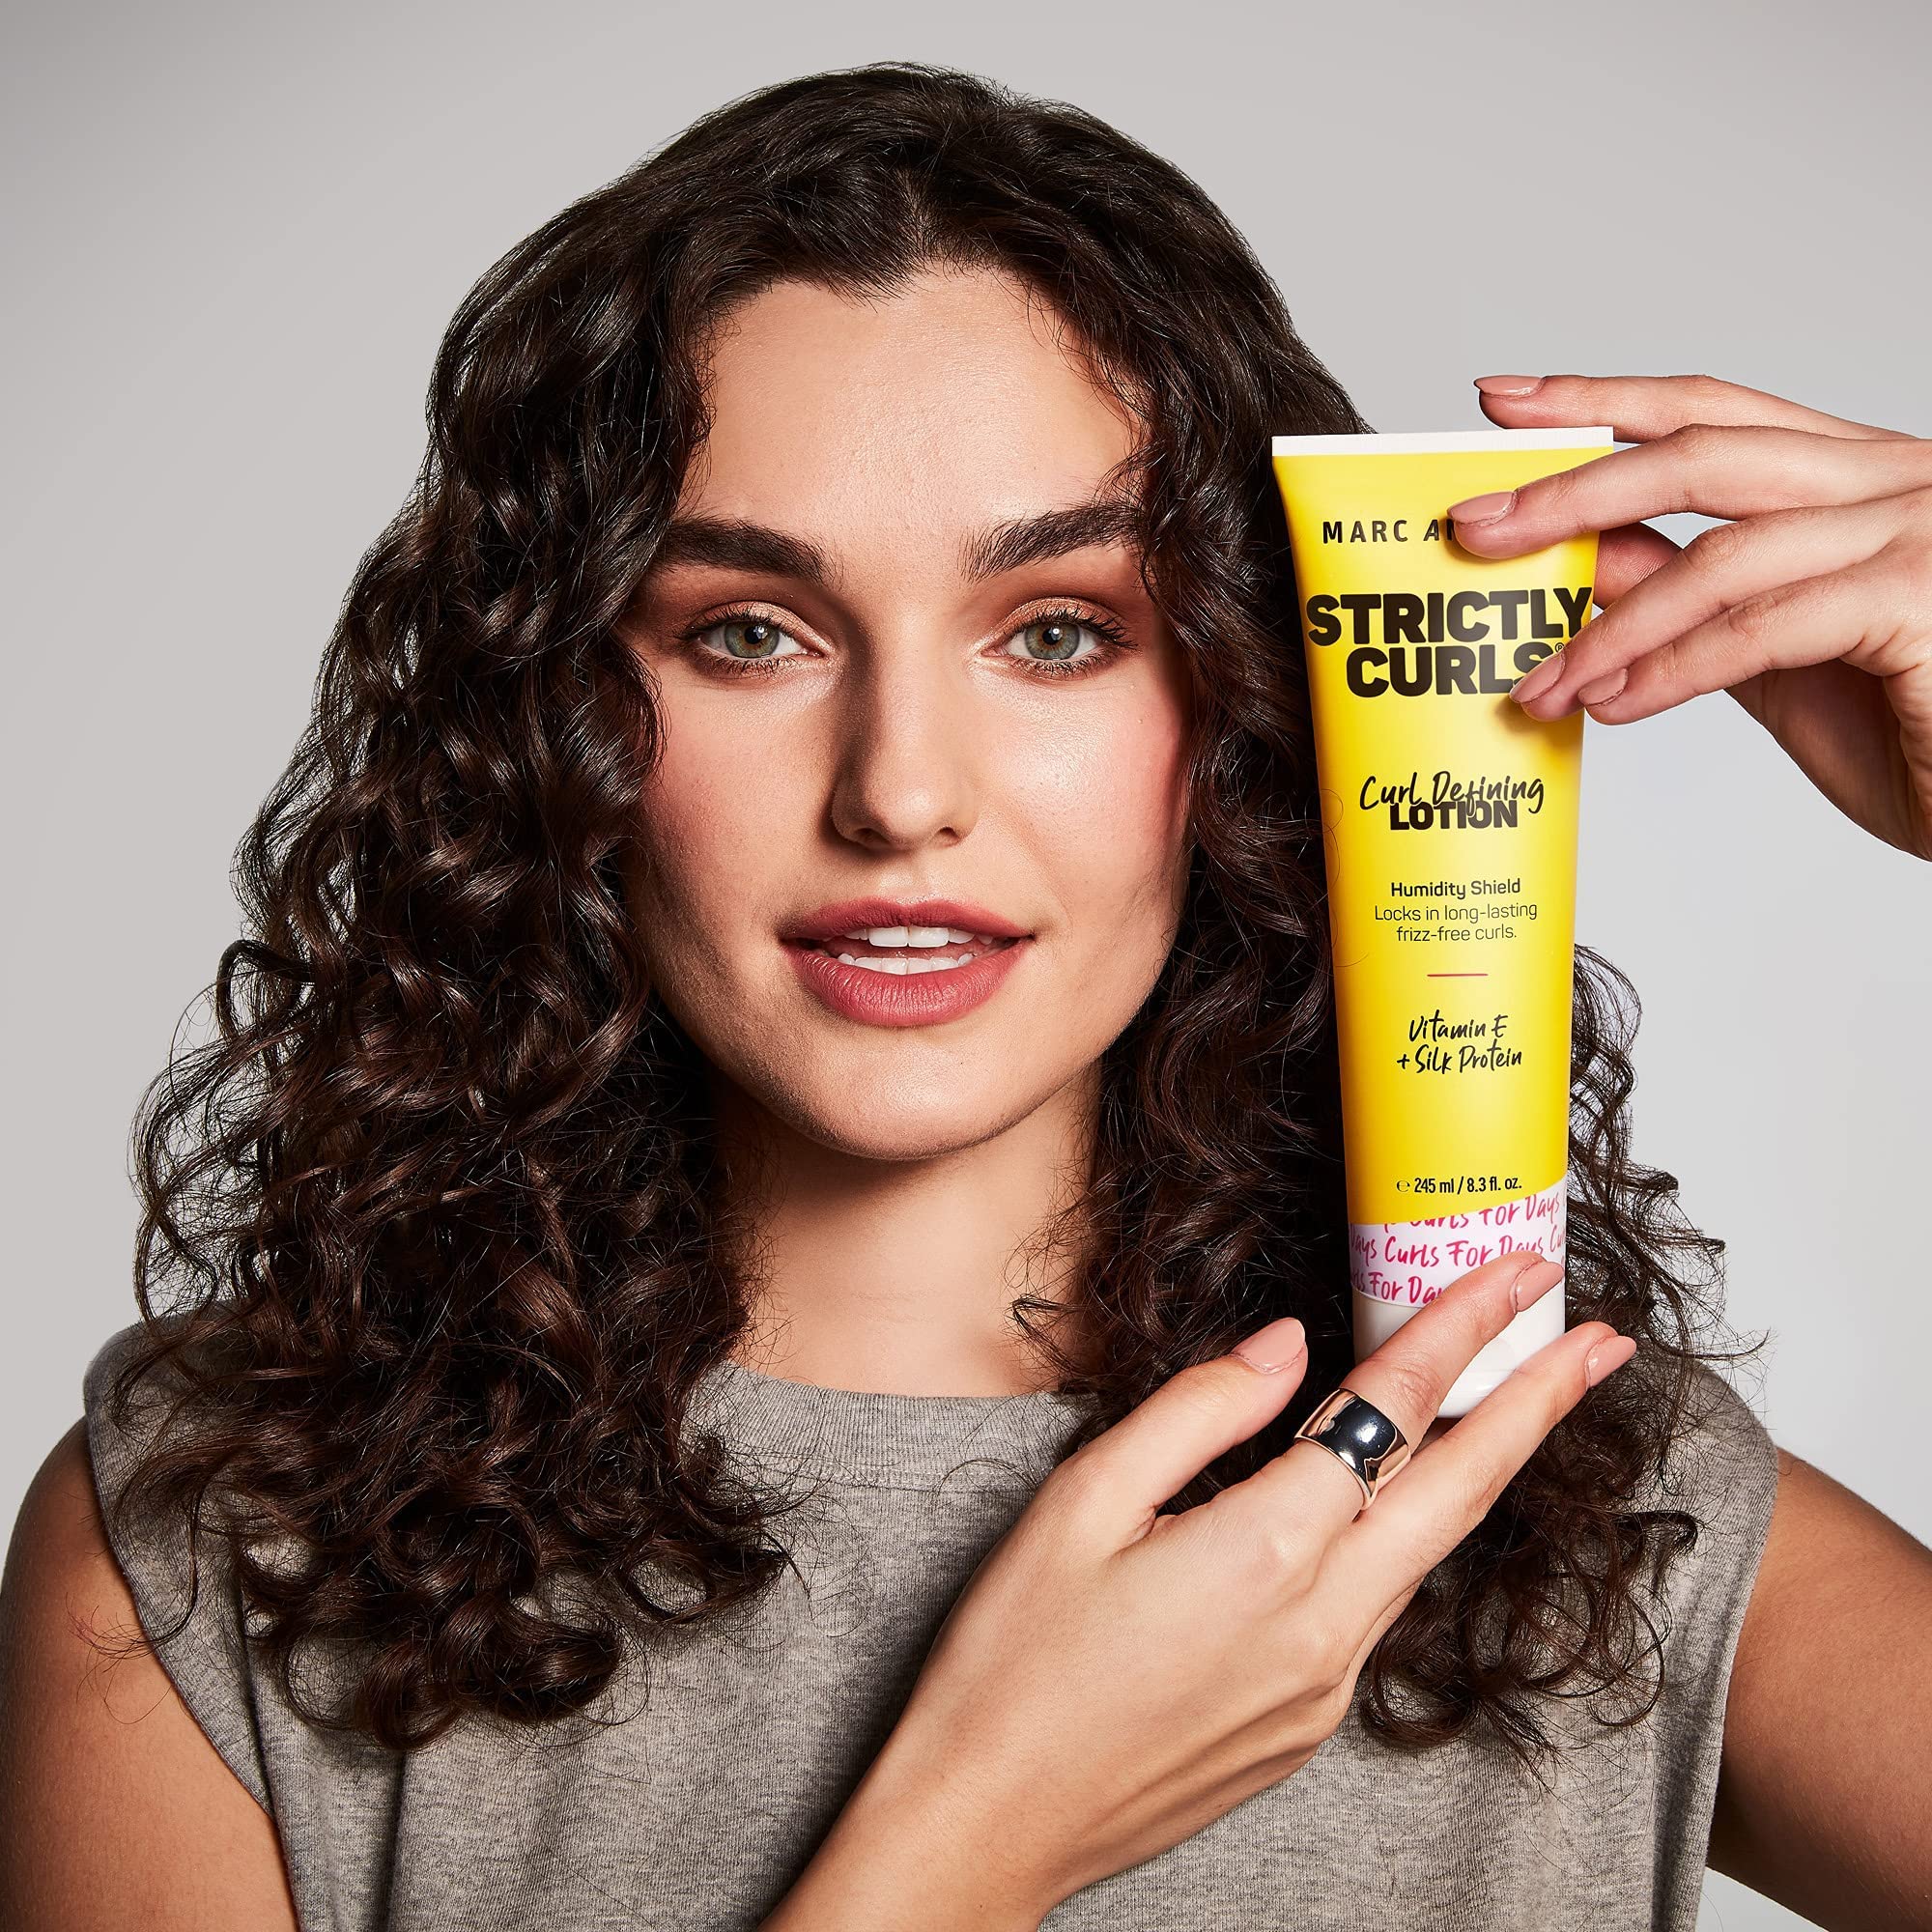 Marc Anthony Curl Defining & Enhancing Lotion, Strictly Curls - Moisturizing Detangler with Vitamin E & Silk Protein for Long-Lasting Frizz-Free Curls - Bounce & Shine For Wavy, Dry or Damaged Hair